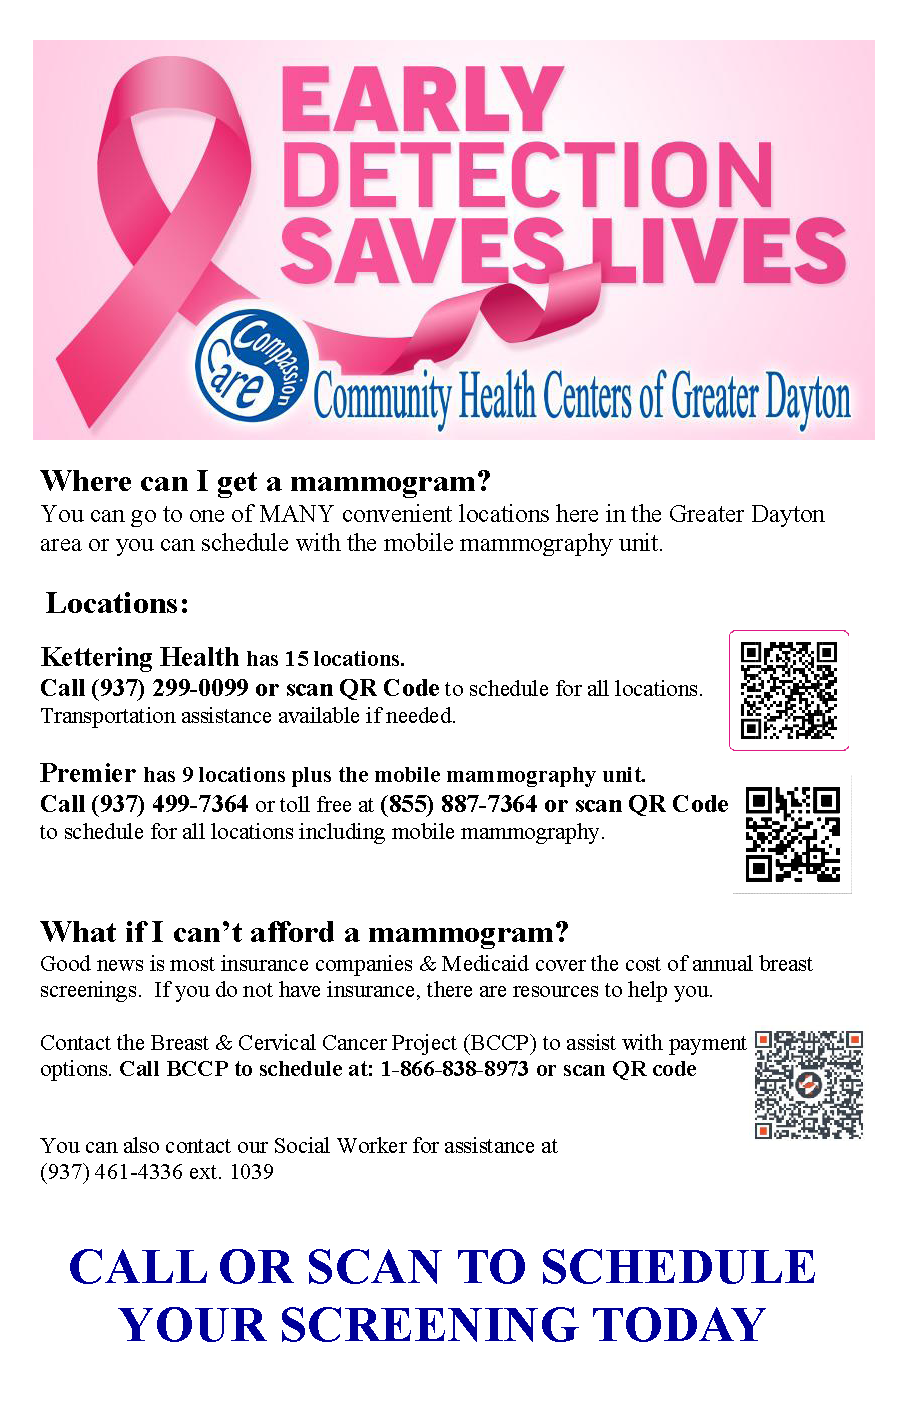 Mammogram Resources from Community Health Centers of Greater Dayton